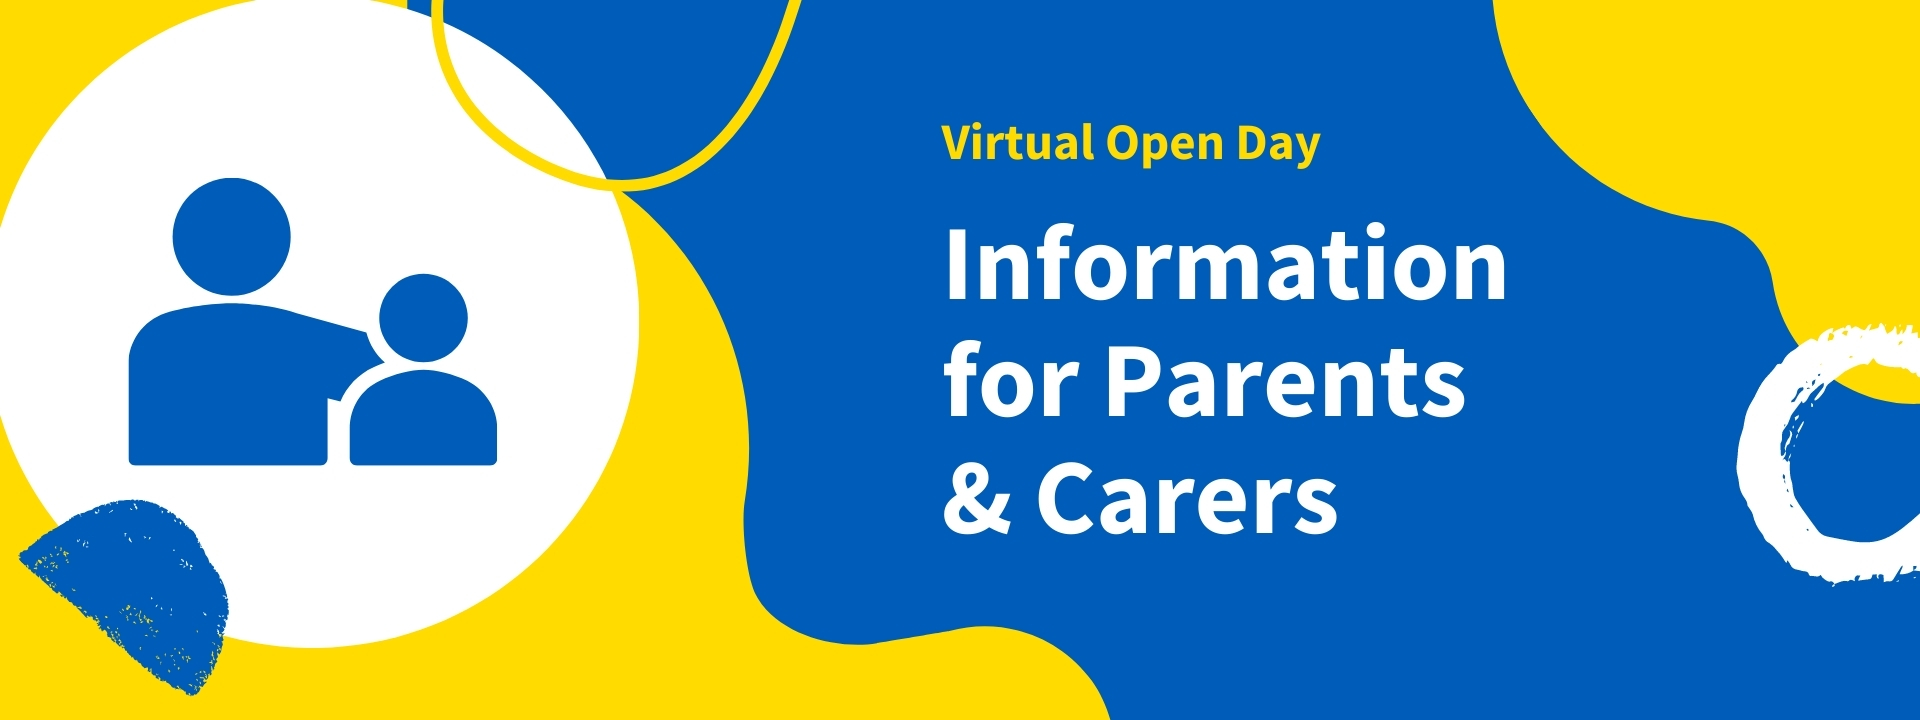 Information for Parents and Carers